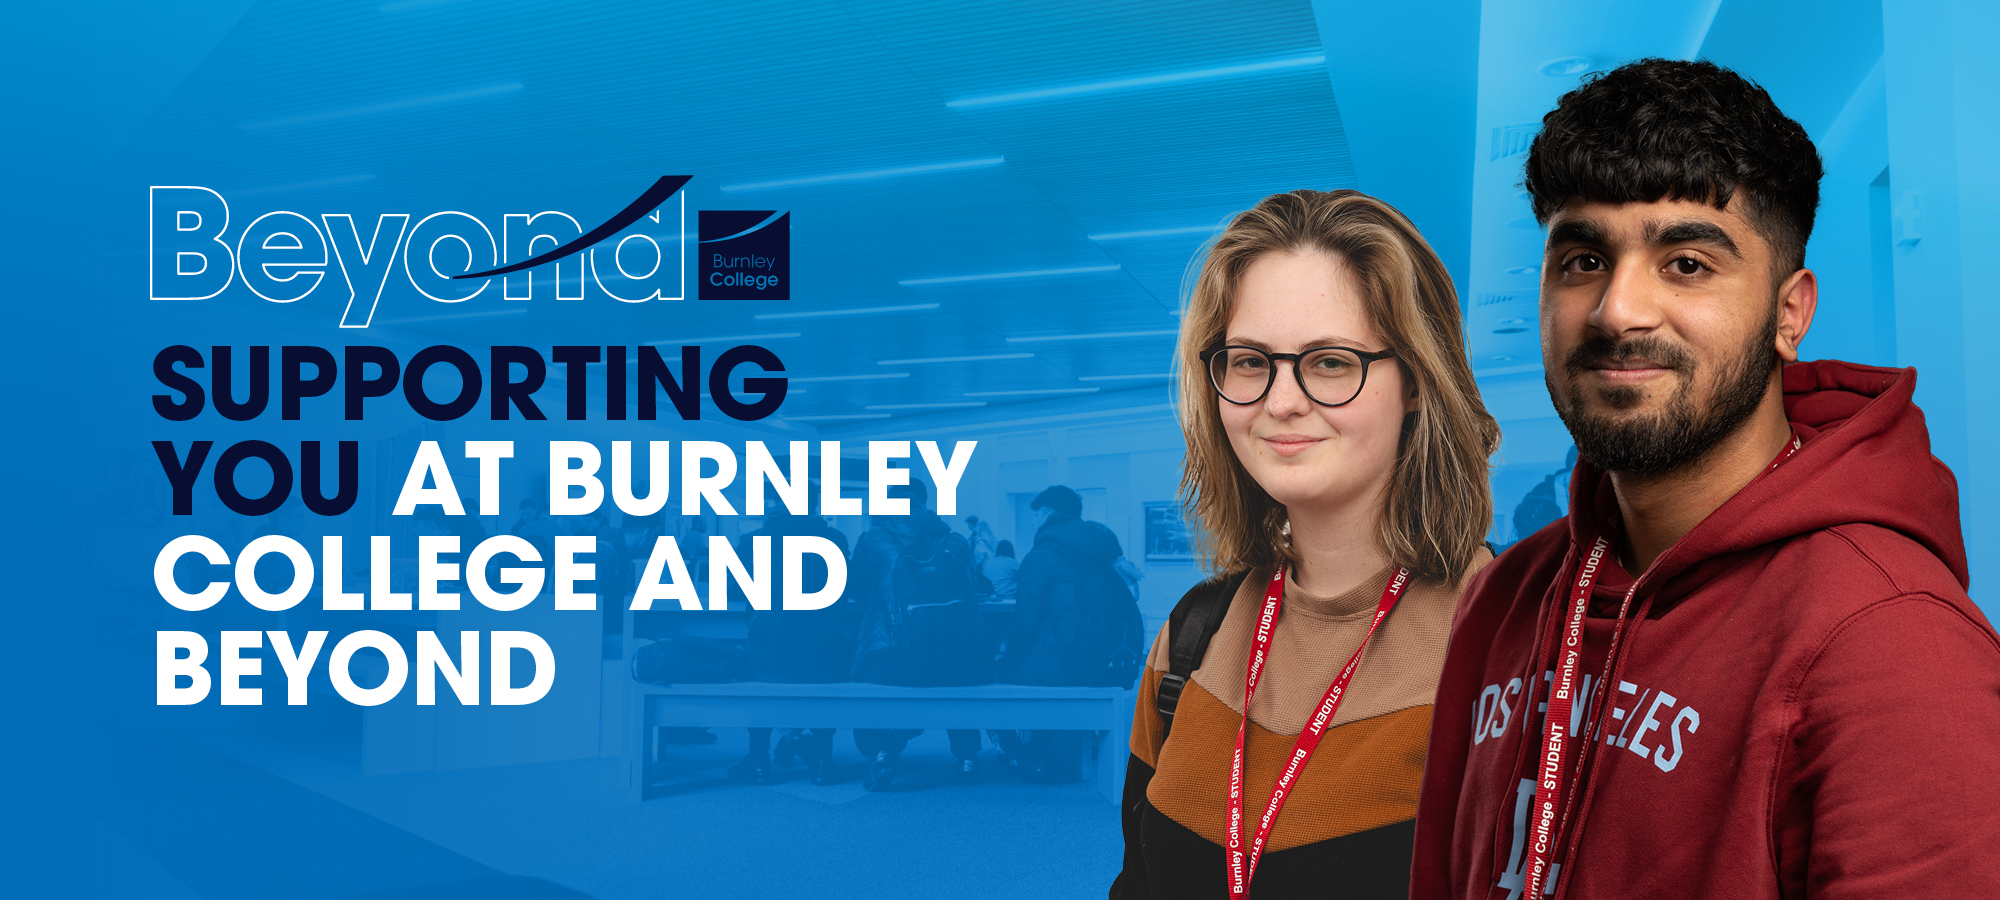 Supporting you at Burnley College and beyond.